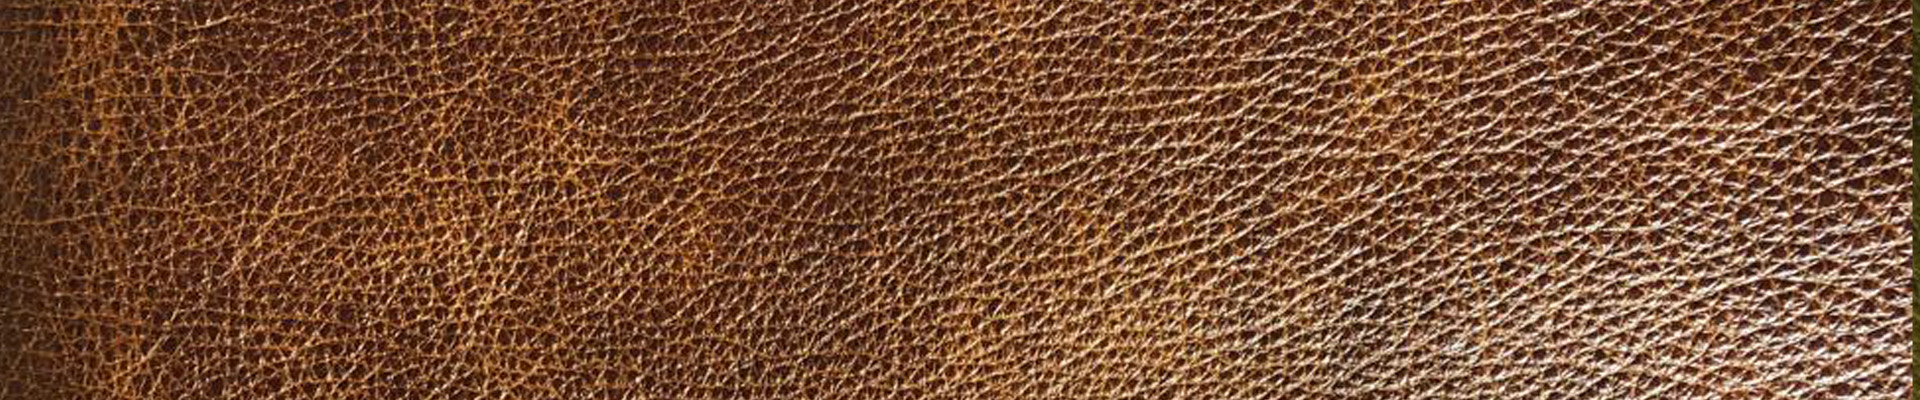 Leather is a recycled product with ecological value